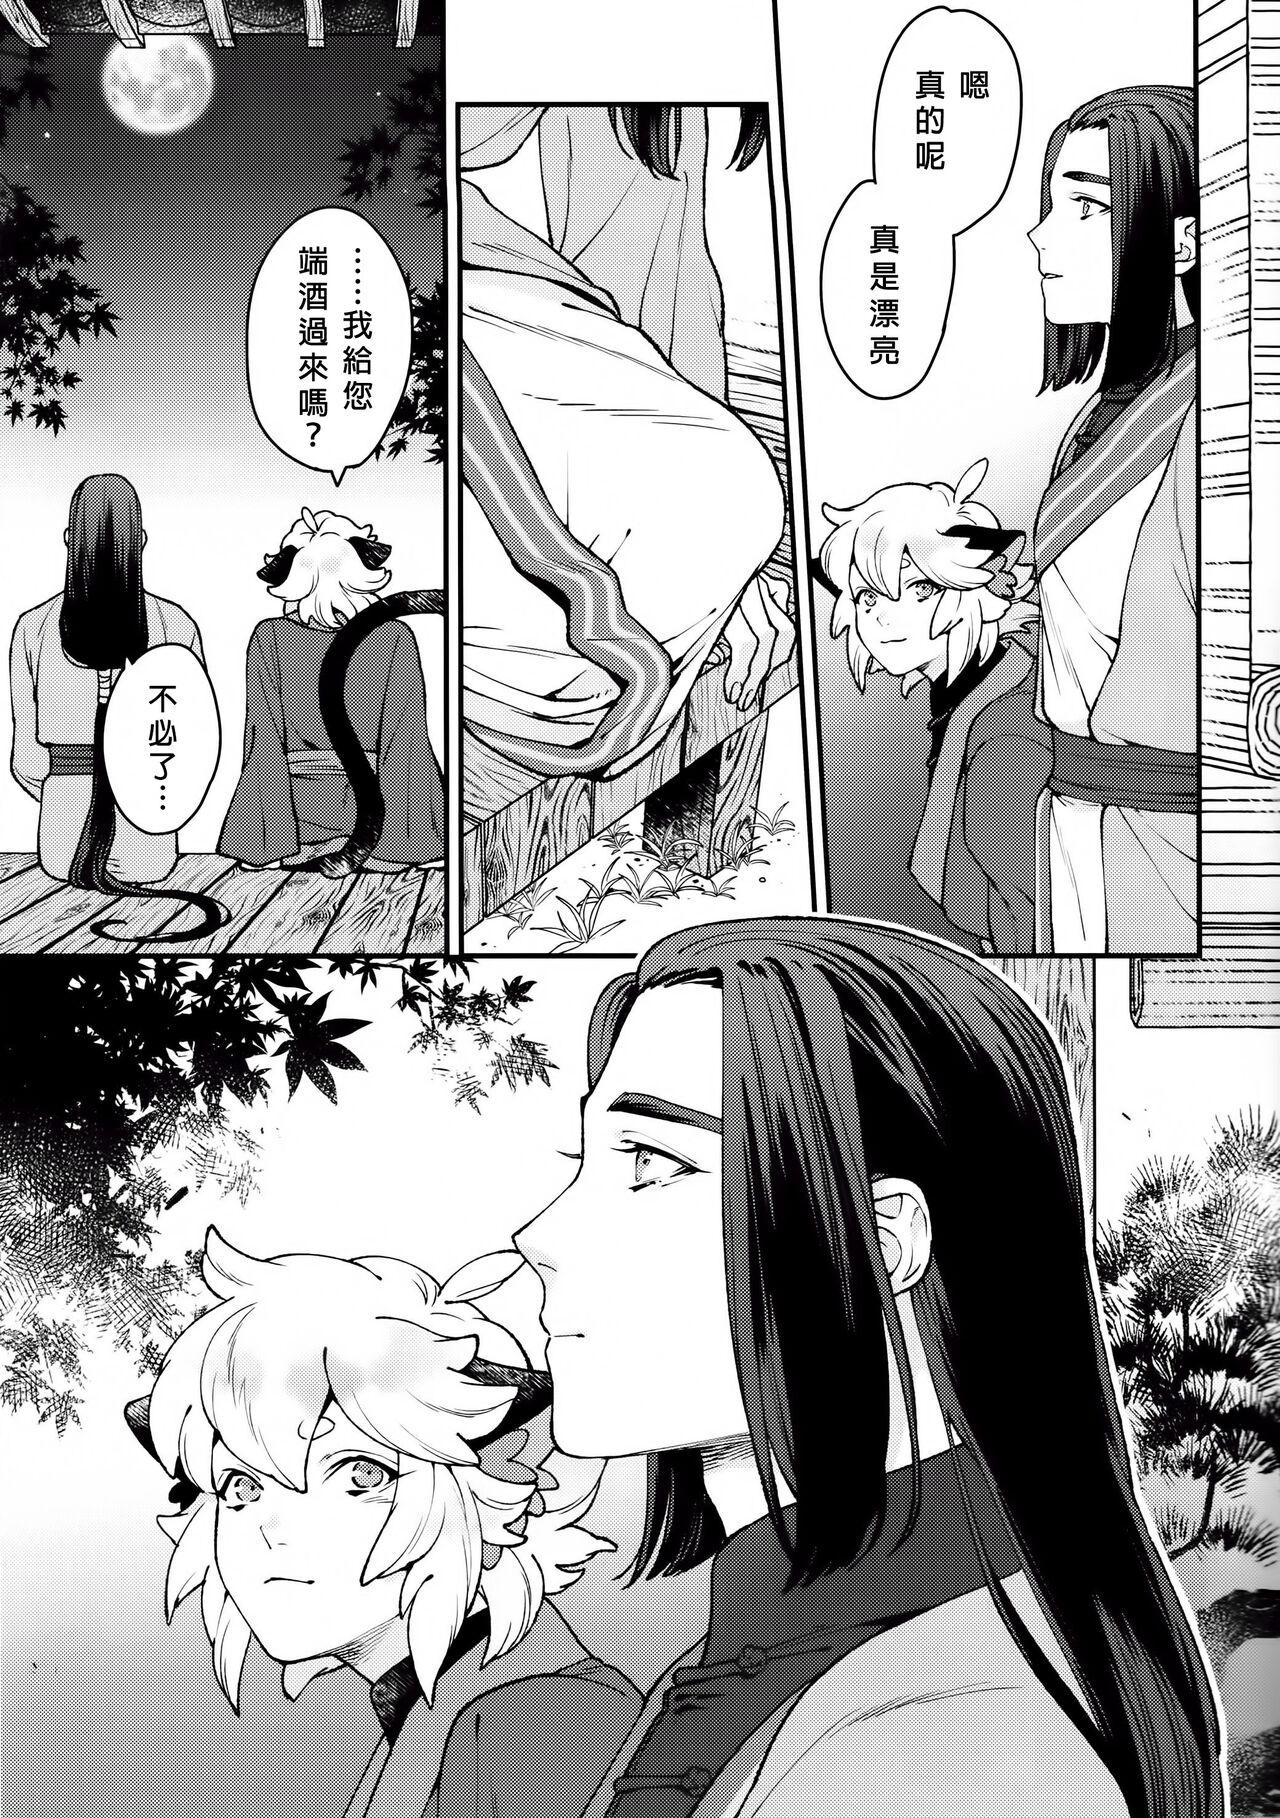 Teenage Sex When the Hoar-frost falls|霜降之时 - The legend of luo xiaohei Futa - Page 4